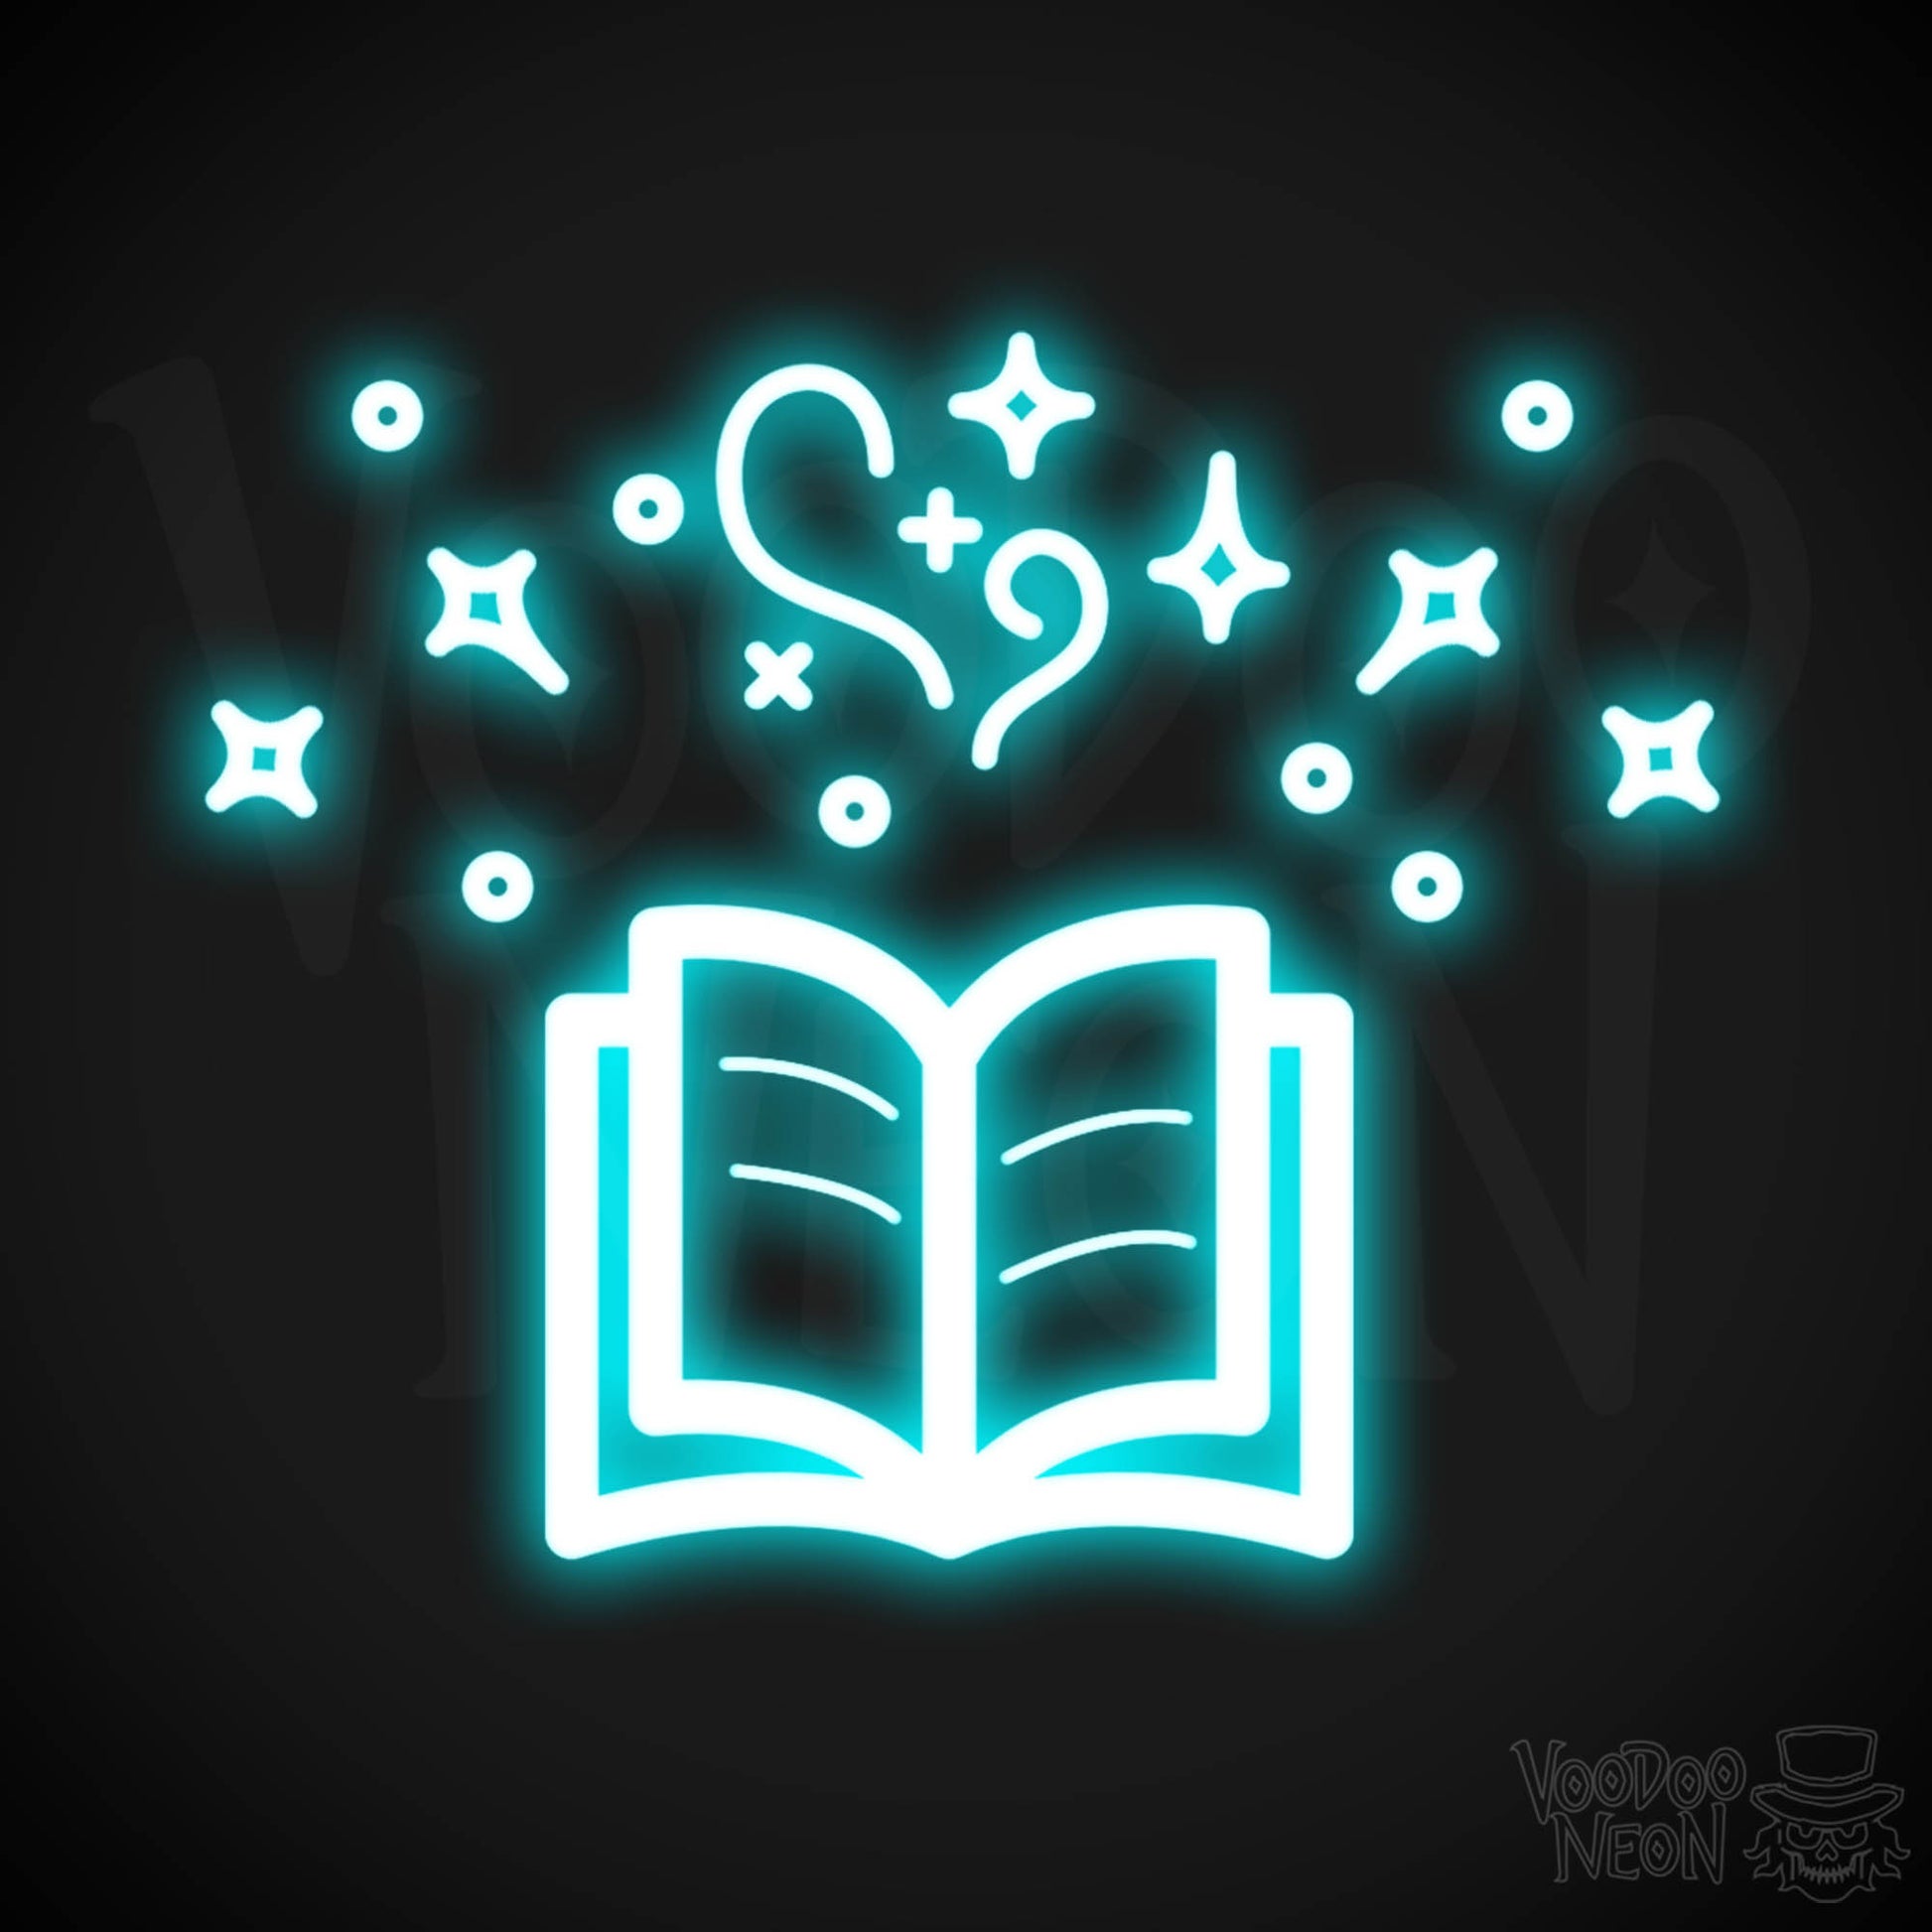 Neon Spell Book - Spell Book Neon Sign - LED Neon Wall Art - Color Ice Blue